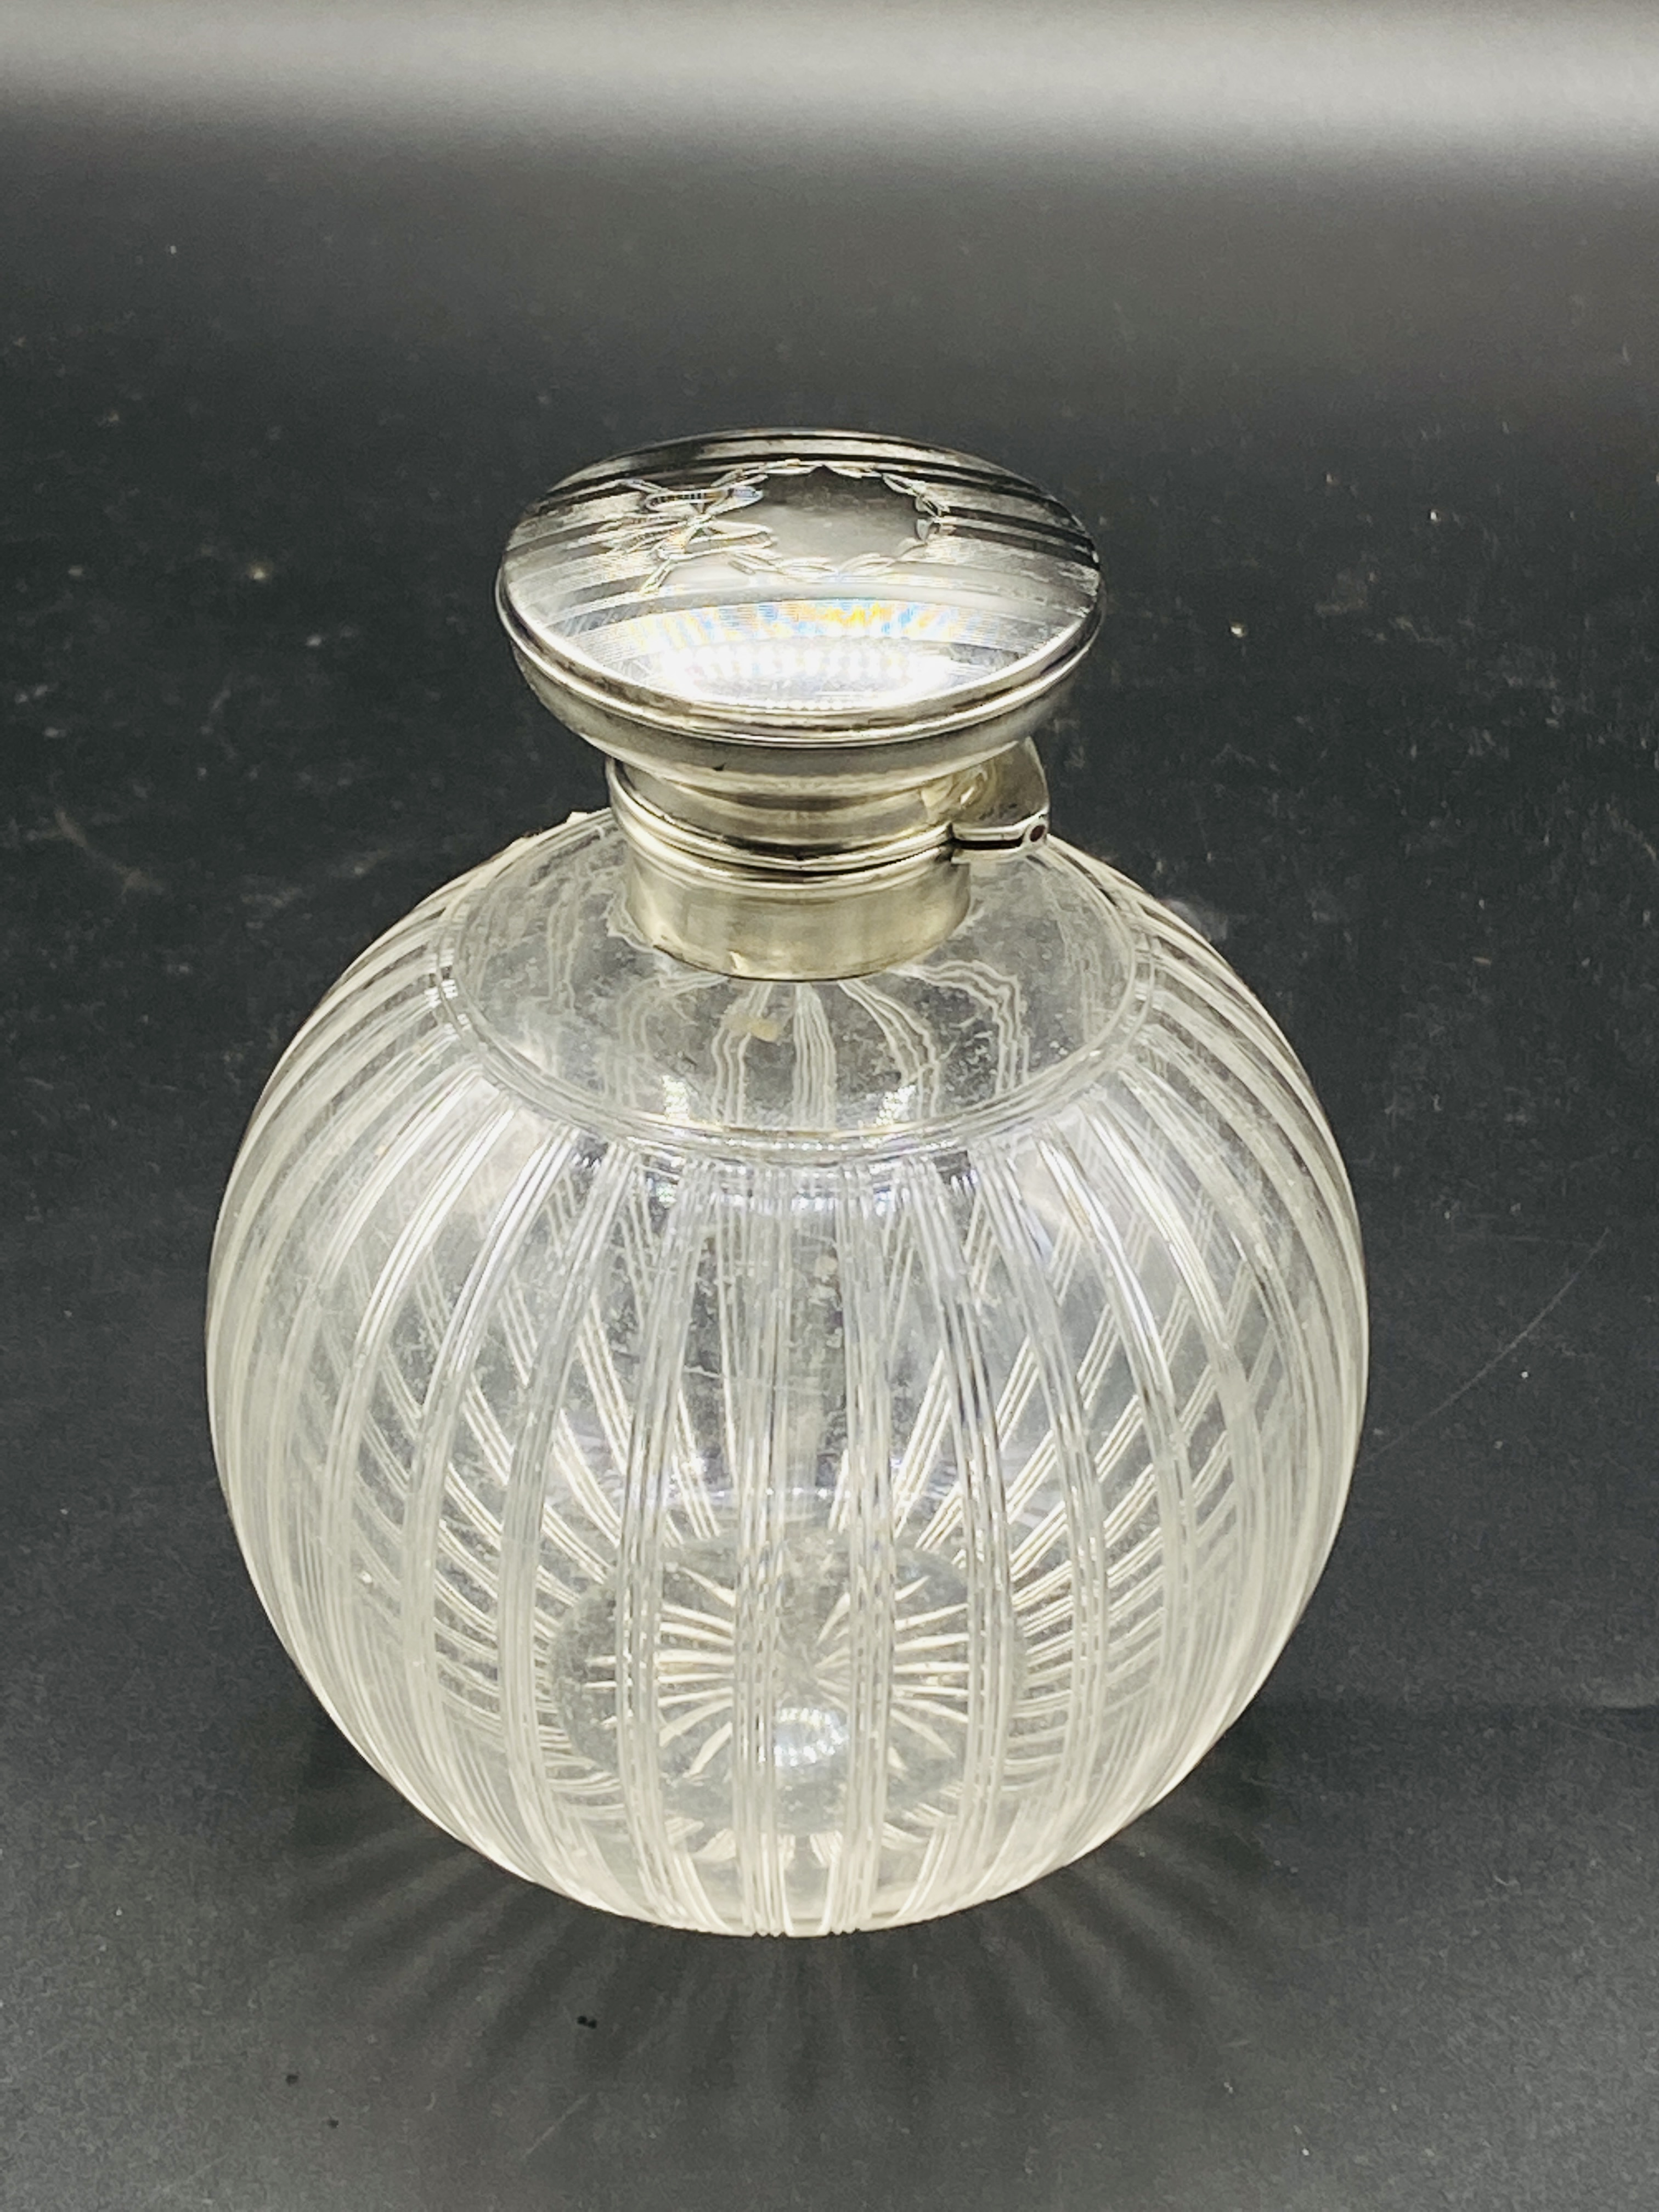 Early 20th century cut glass toilet water bottle with silver top - Image 3 of 4